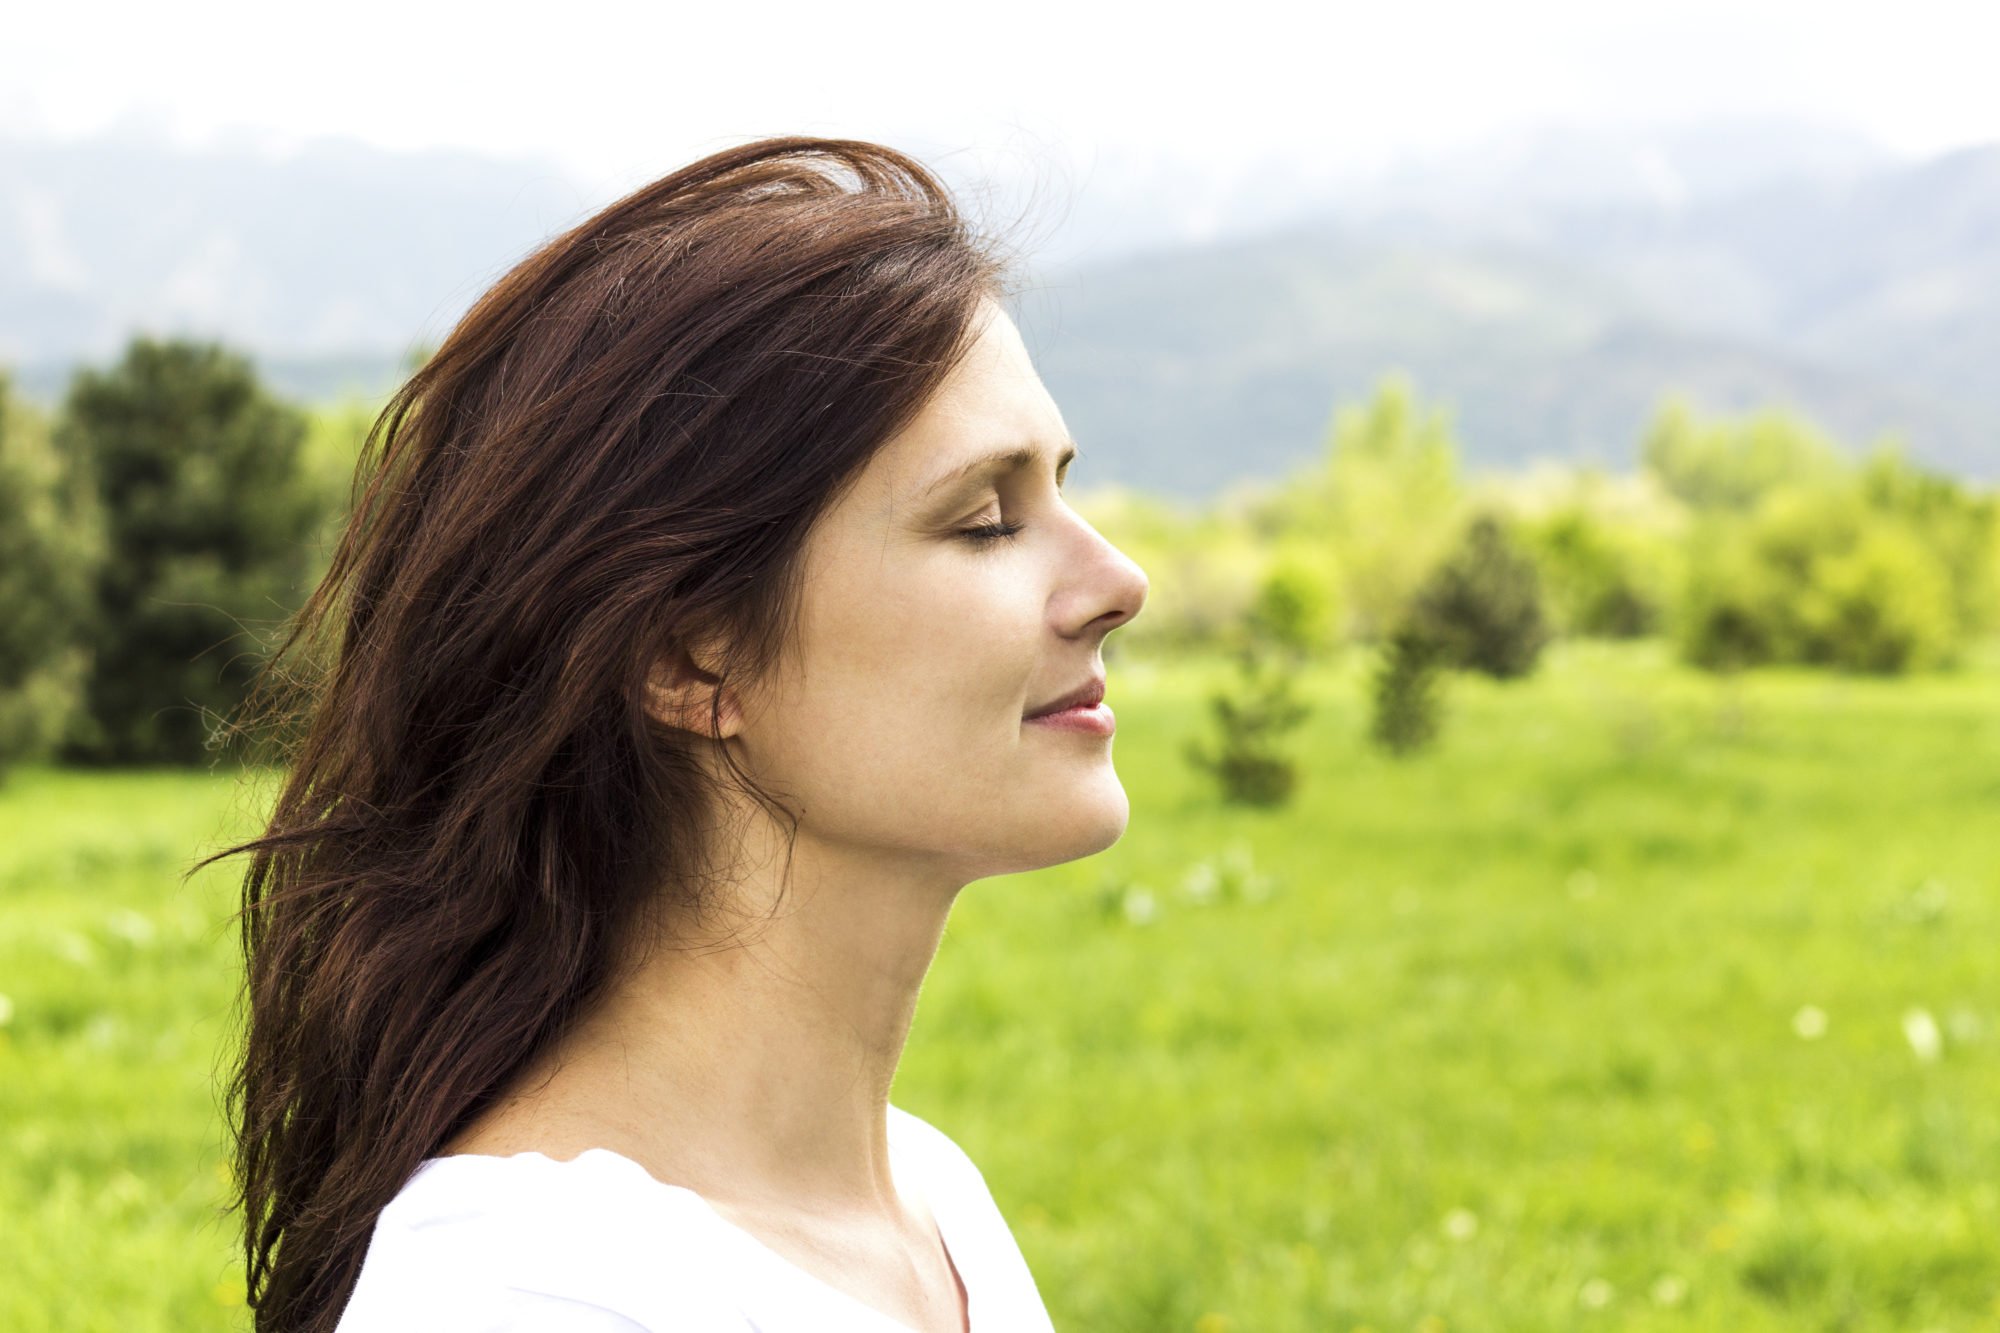 How You Can Use Your Breath to Relieve Anxiety